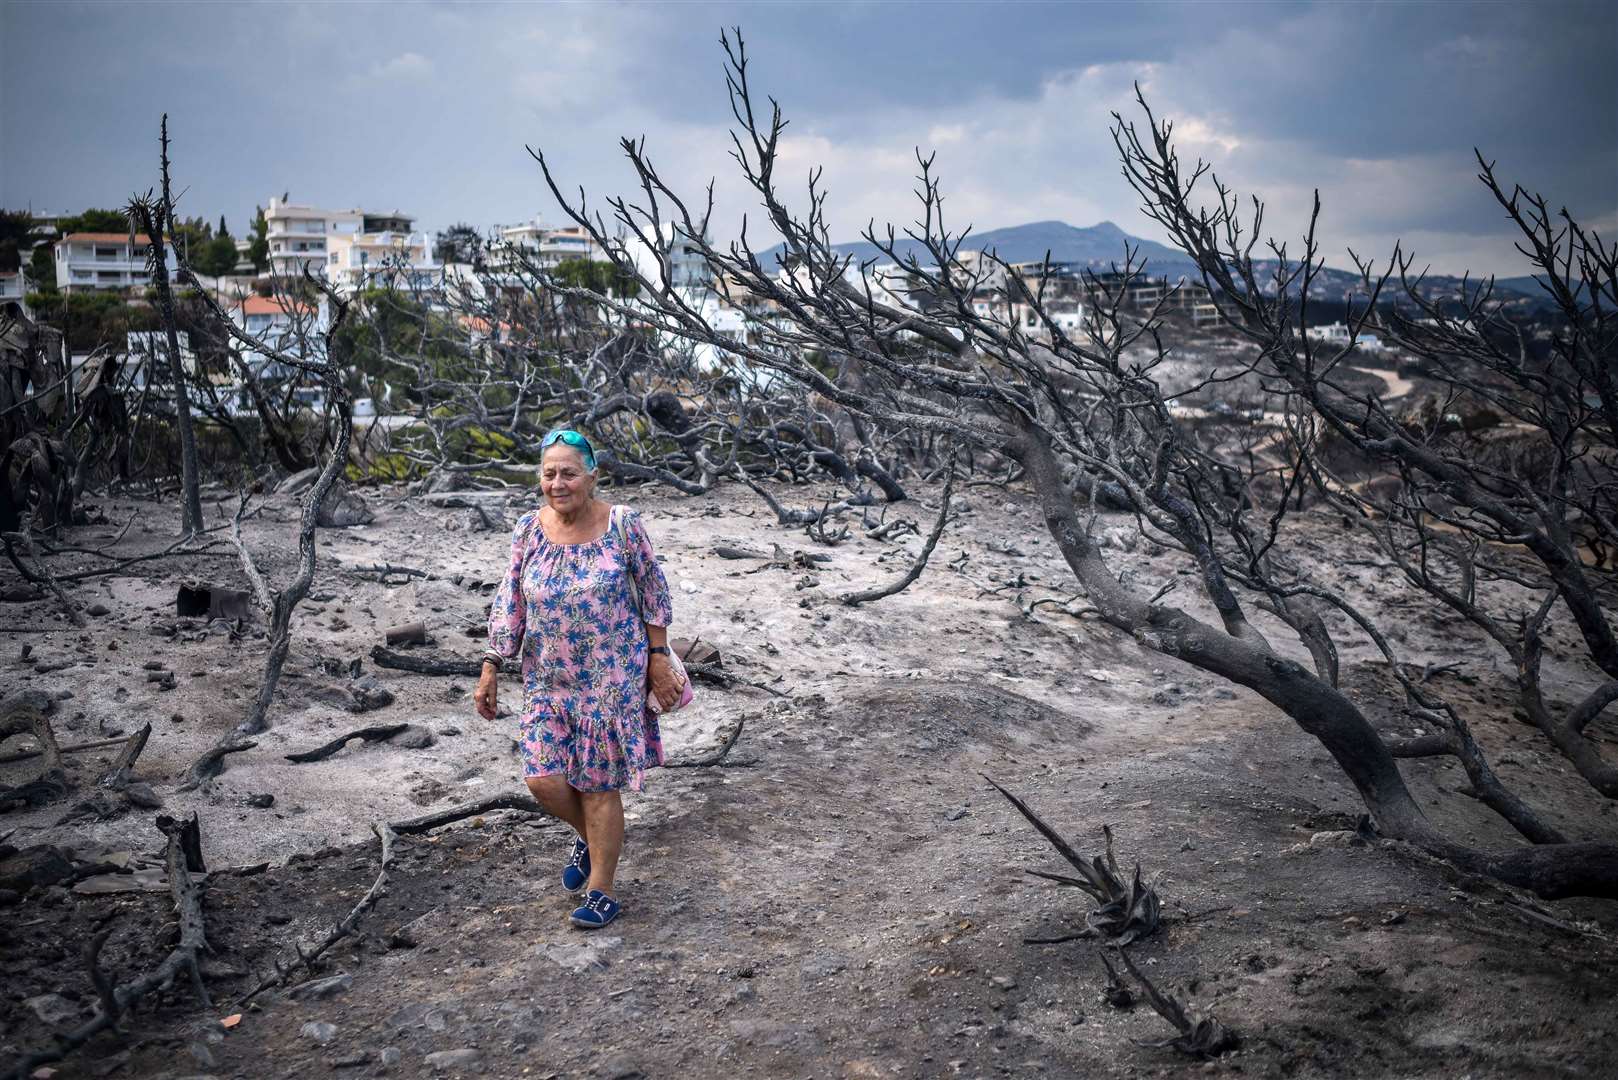 An elderly woman walks through an area of burnt bushes in Rafina, Greece on July 25 2018. Wildfires ravaged houses and properties in the seaside resort earlier this week, killing 79 people.